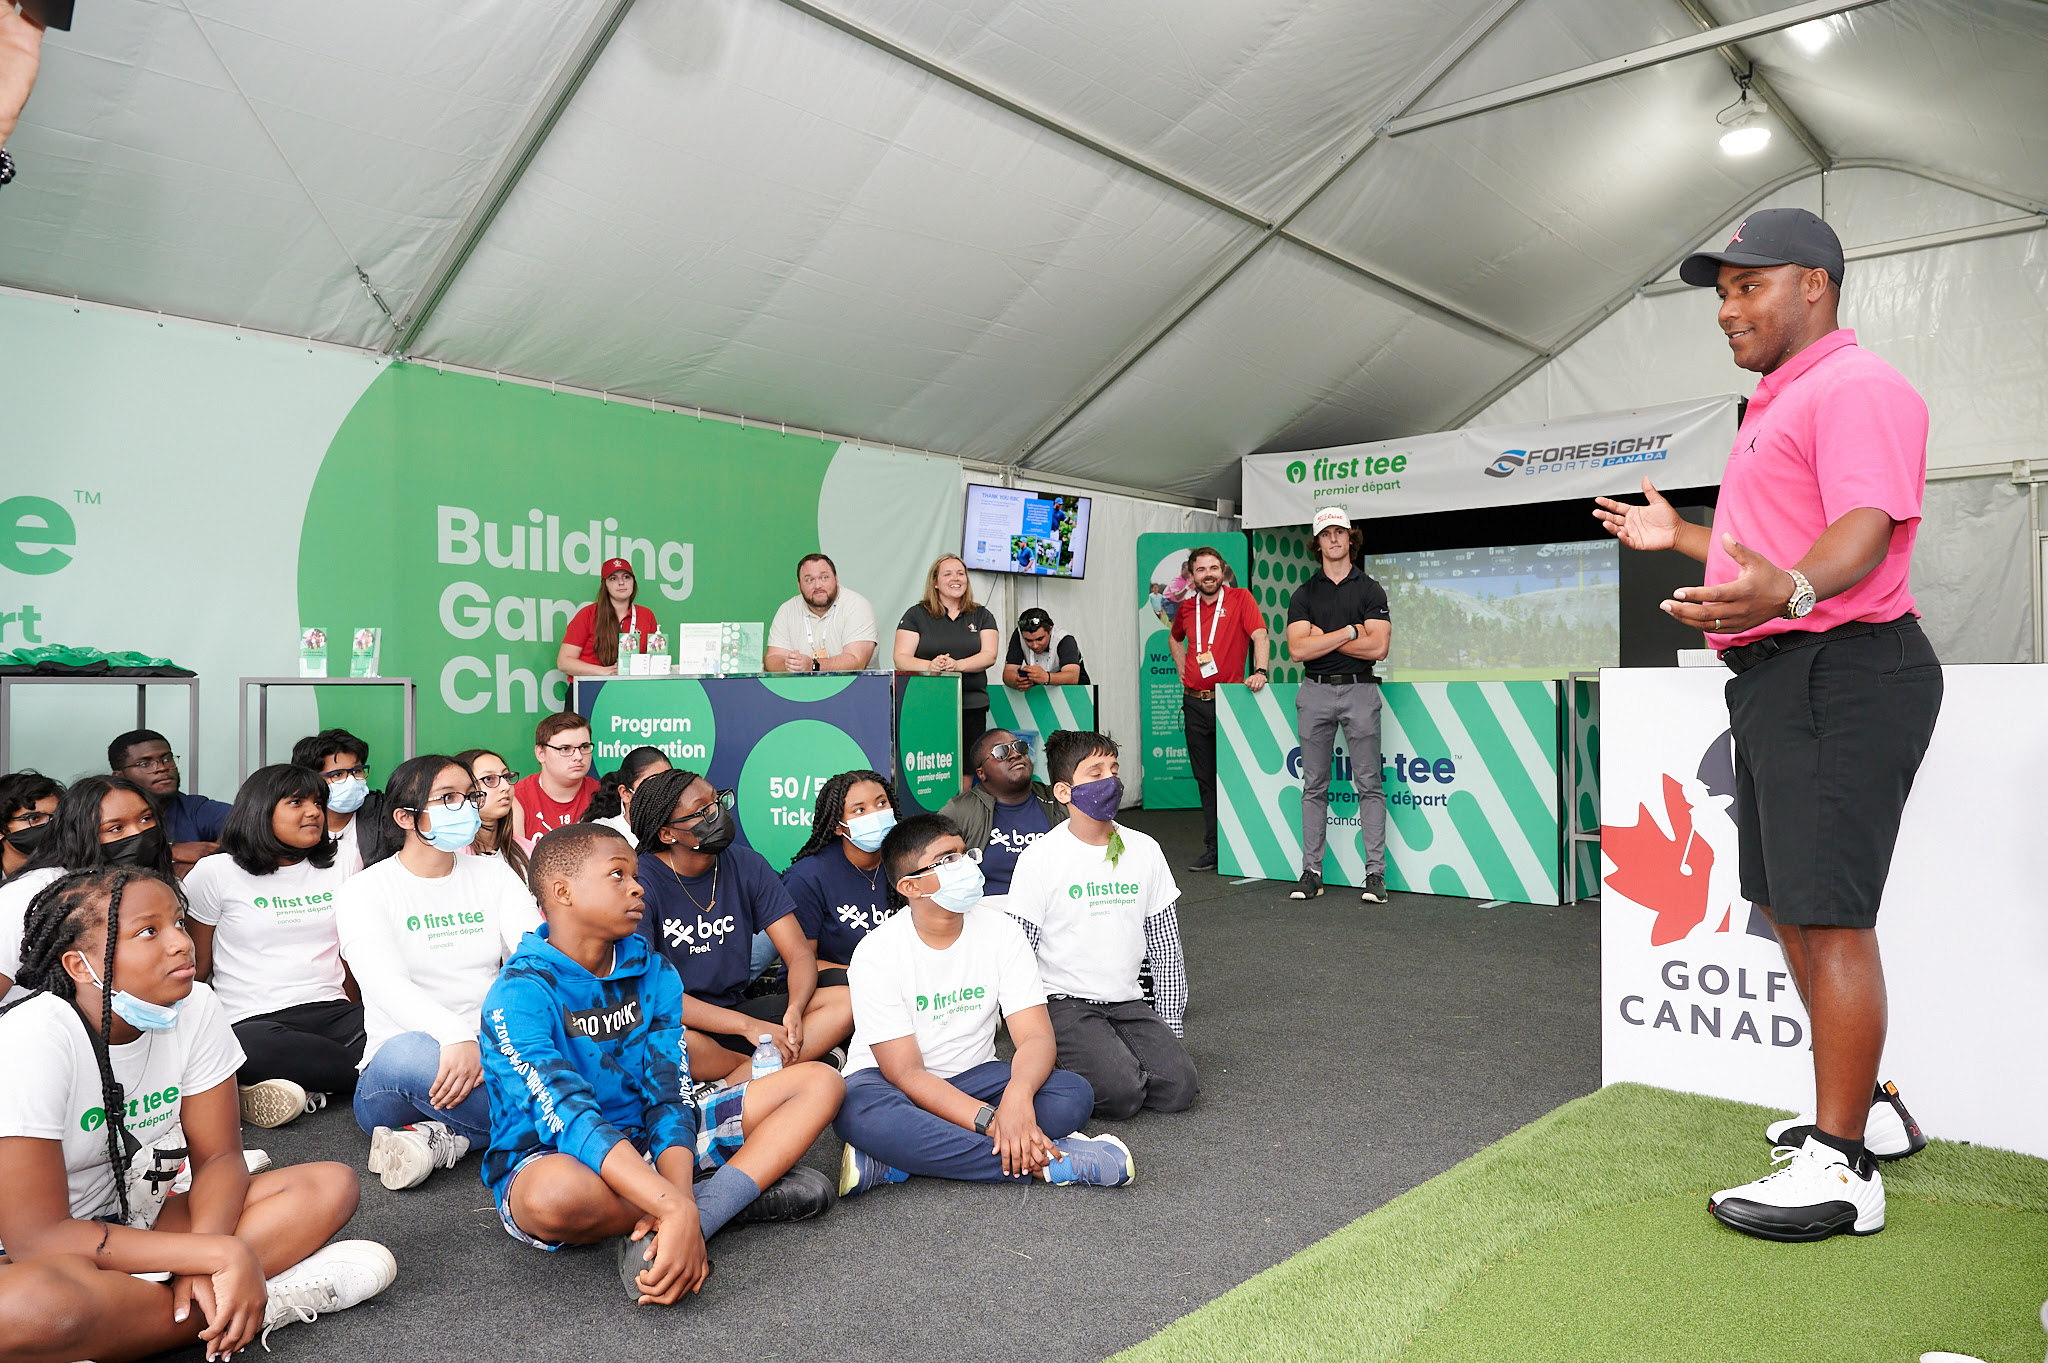 Pro golfer Harold Varner III speaking with youth participants in the First Tee tent